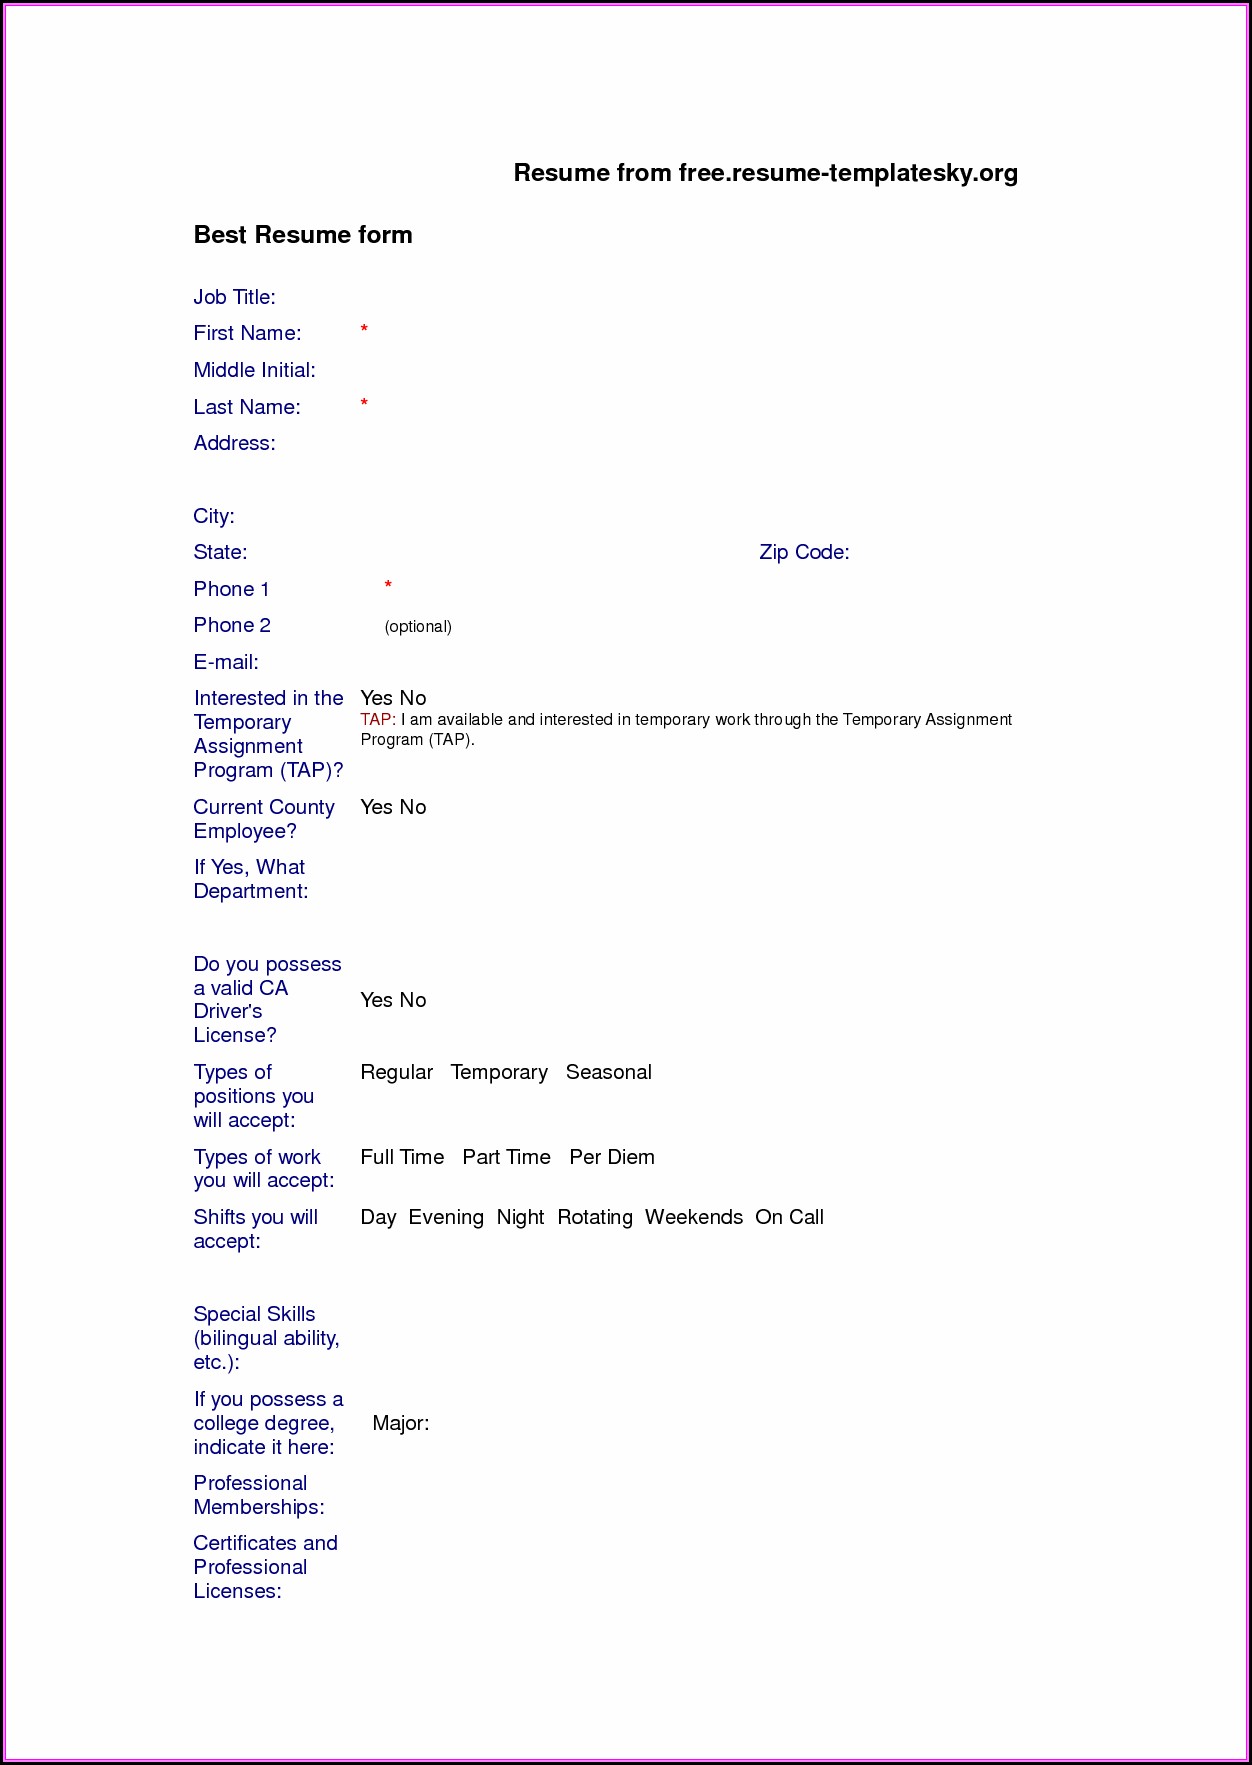 Resume Blank Form Free Download